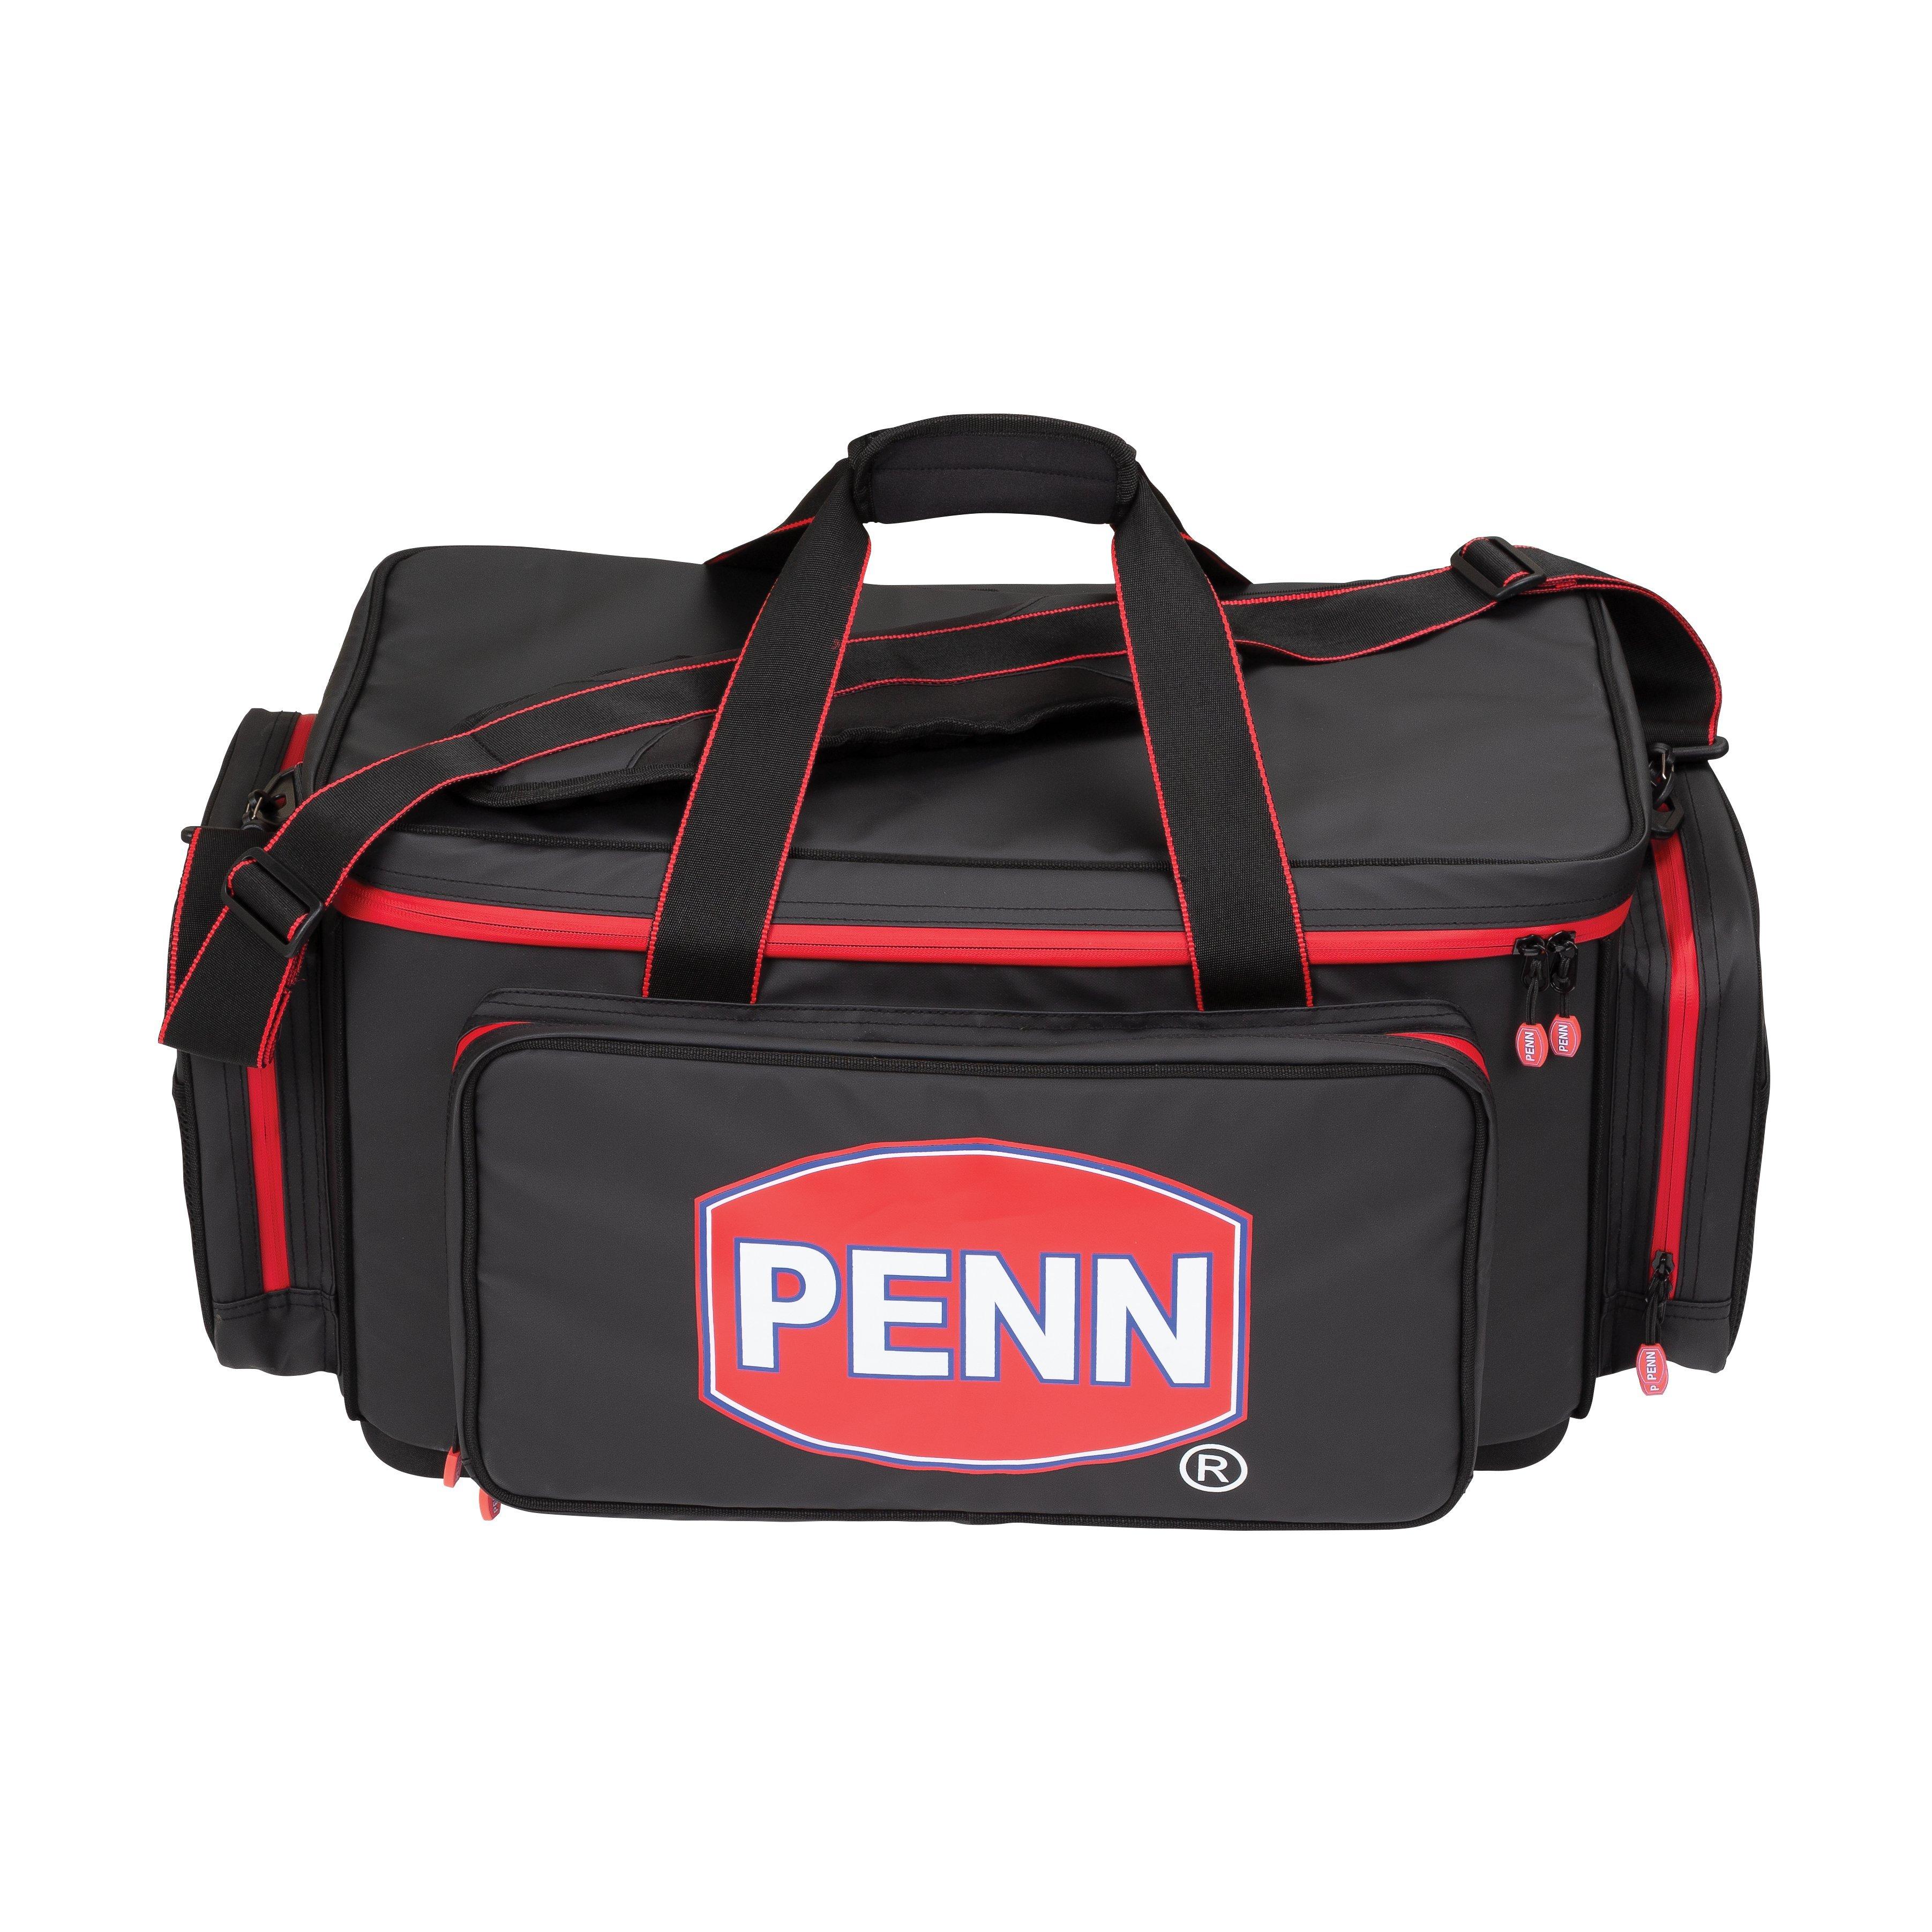 Pure Fishing Products Penn Luggage